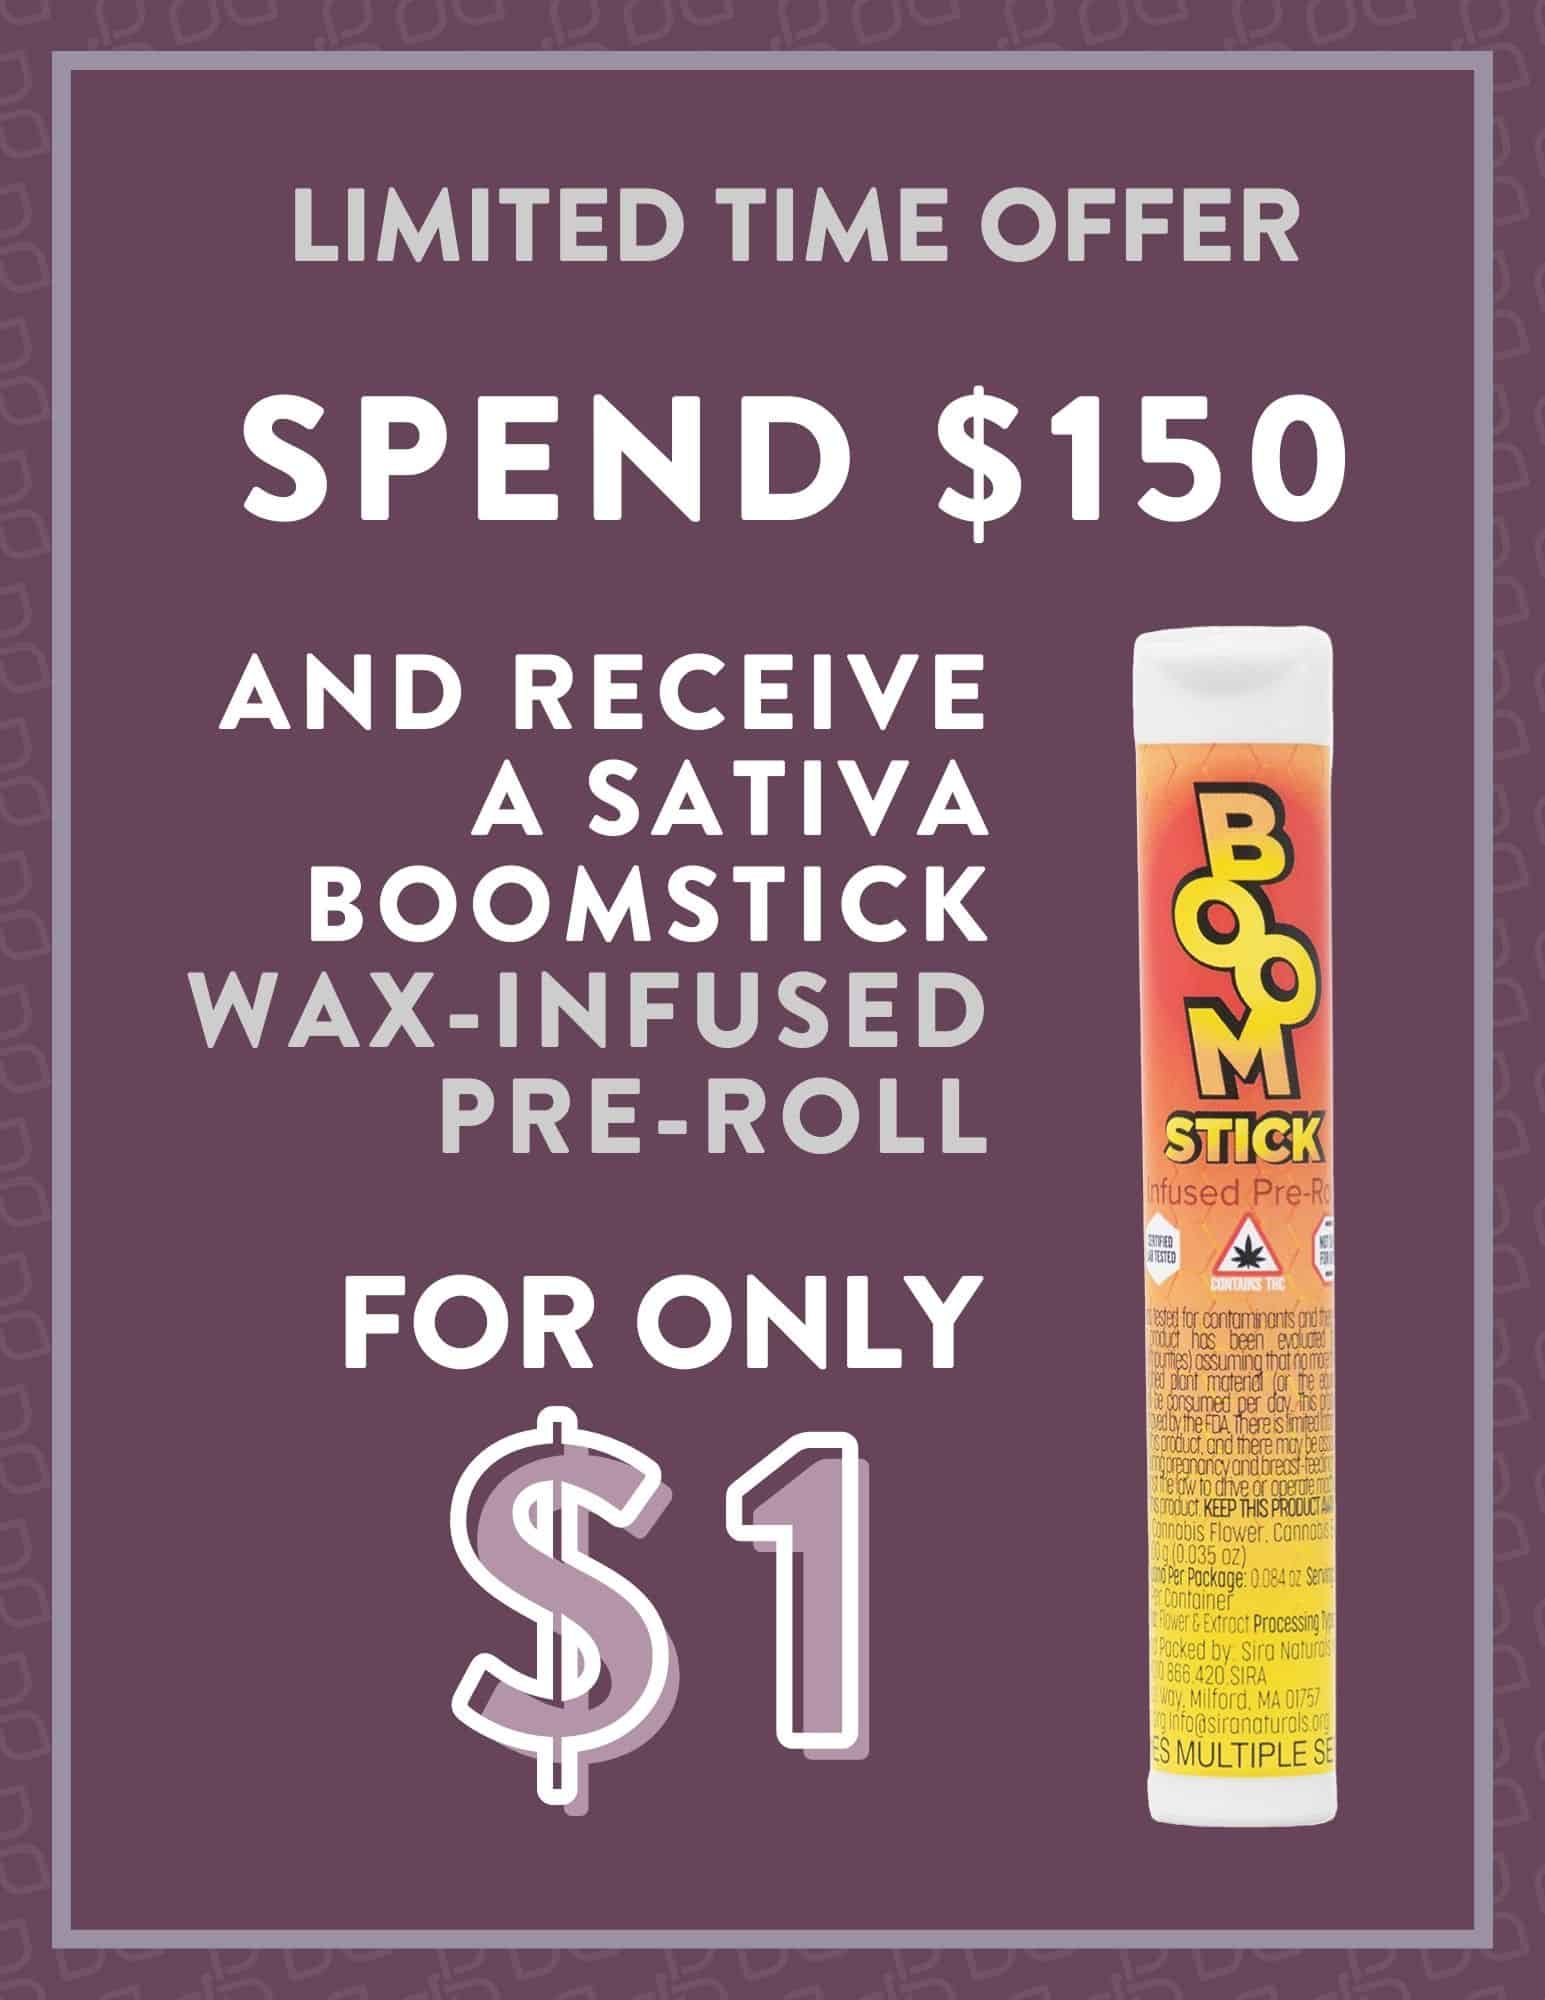 Get a Sativa Boomstick Pre-Roll for ONLY $1 with $150 Purchase